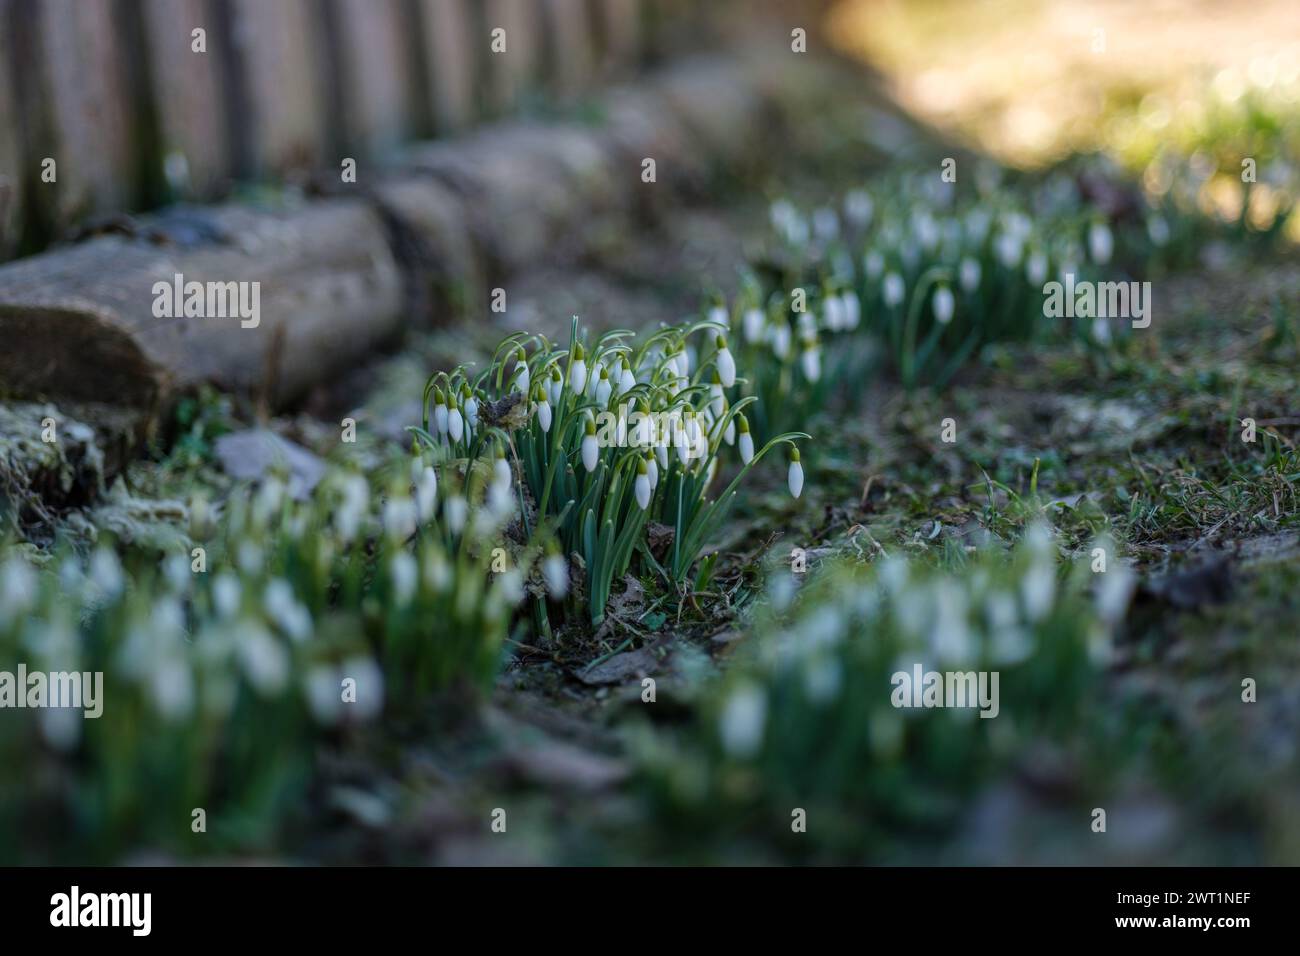 The subtle charm of snowdrops graces Latvia's landscapes, a reminder of nature's cycles Stock Photo